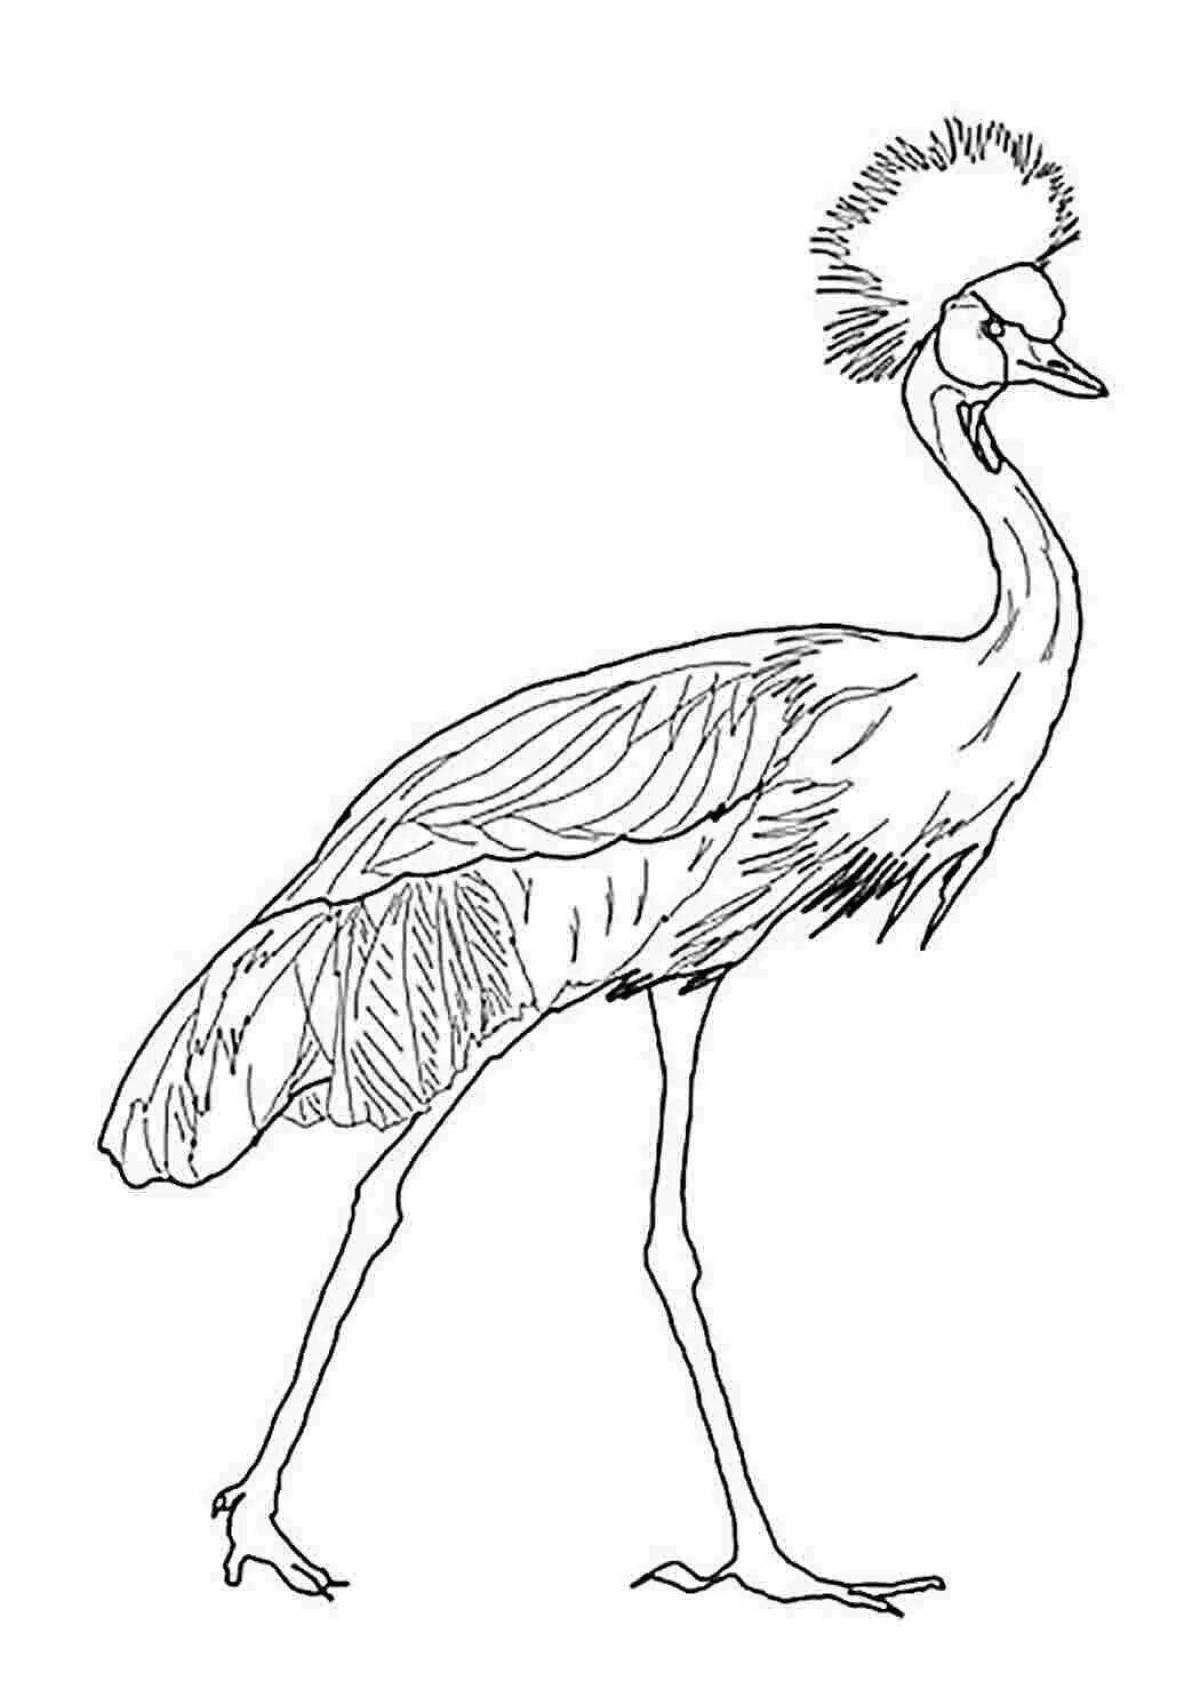 Amazing coloring pages of cranes for kids